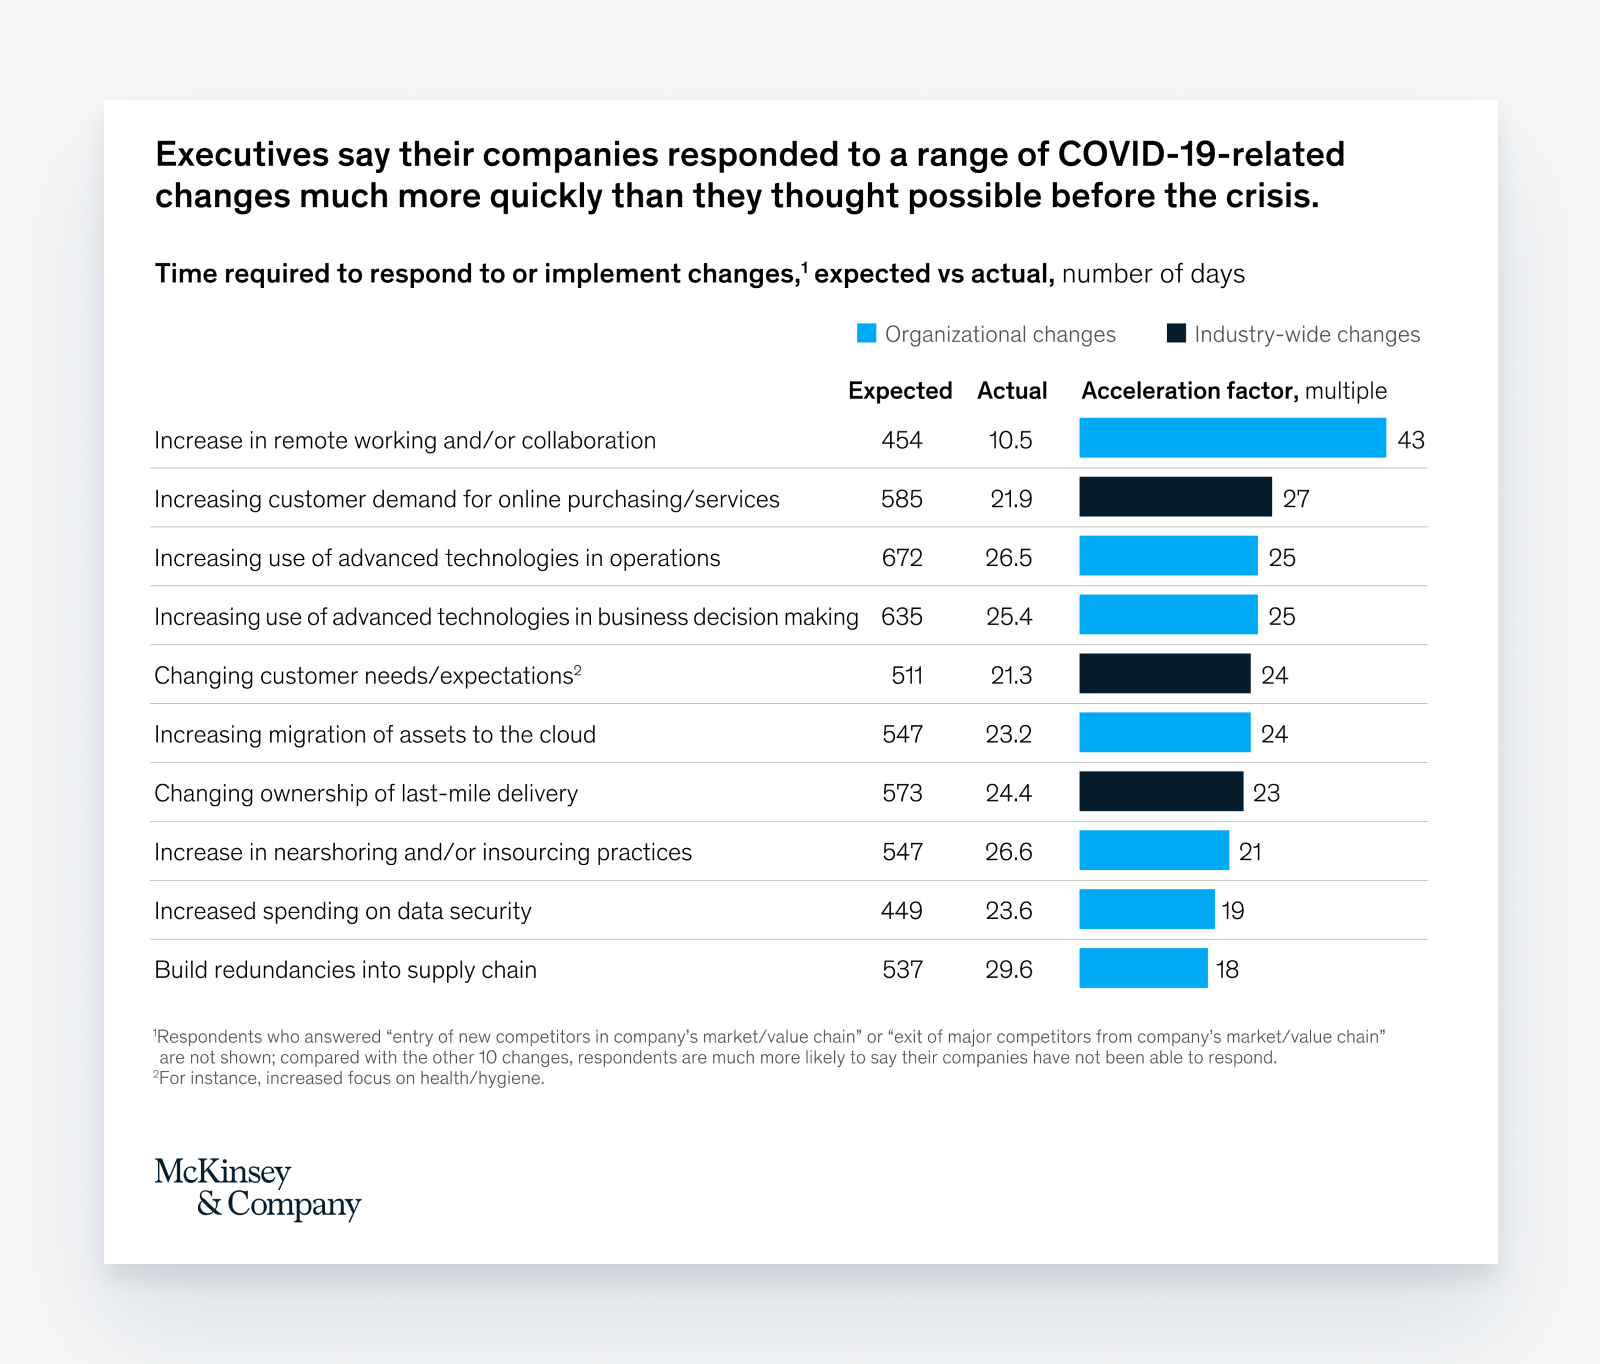 Executives say their companies responded to a range of COVID-19-related changes much more quickly than they thought possible before the crisis - McKinsey & Company 2020